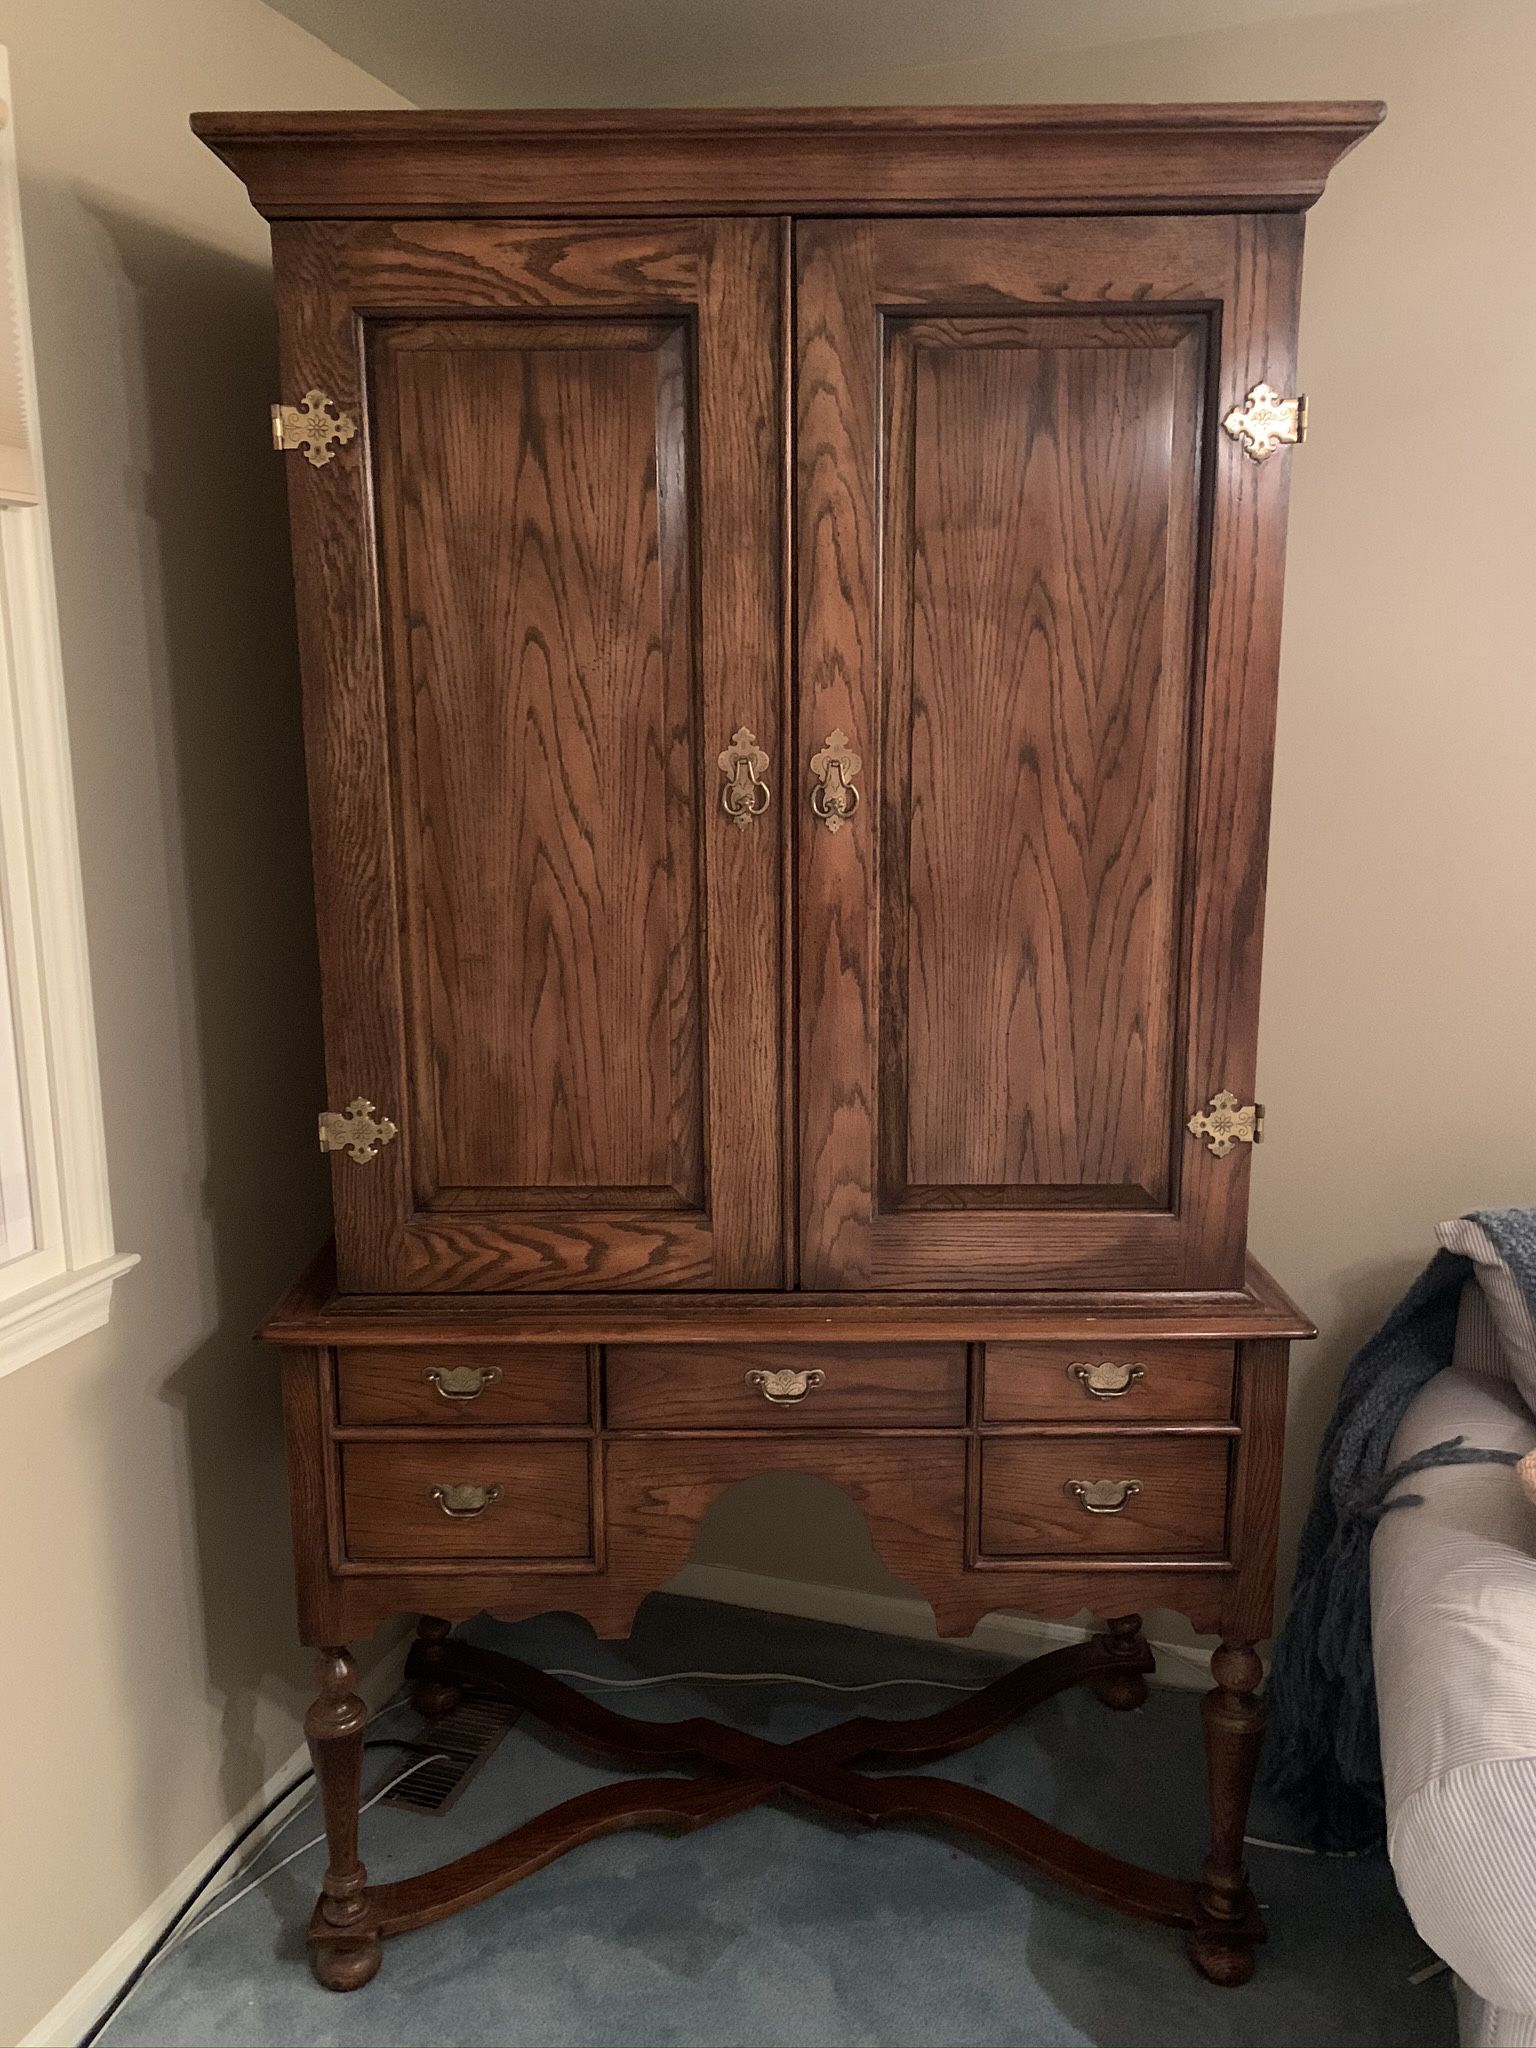 Solid Wood Hutch Cabinet